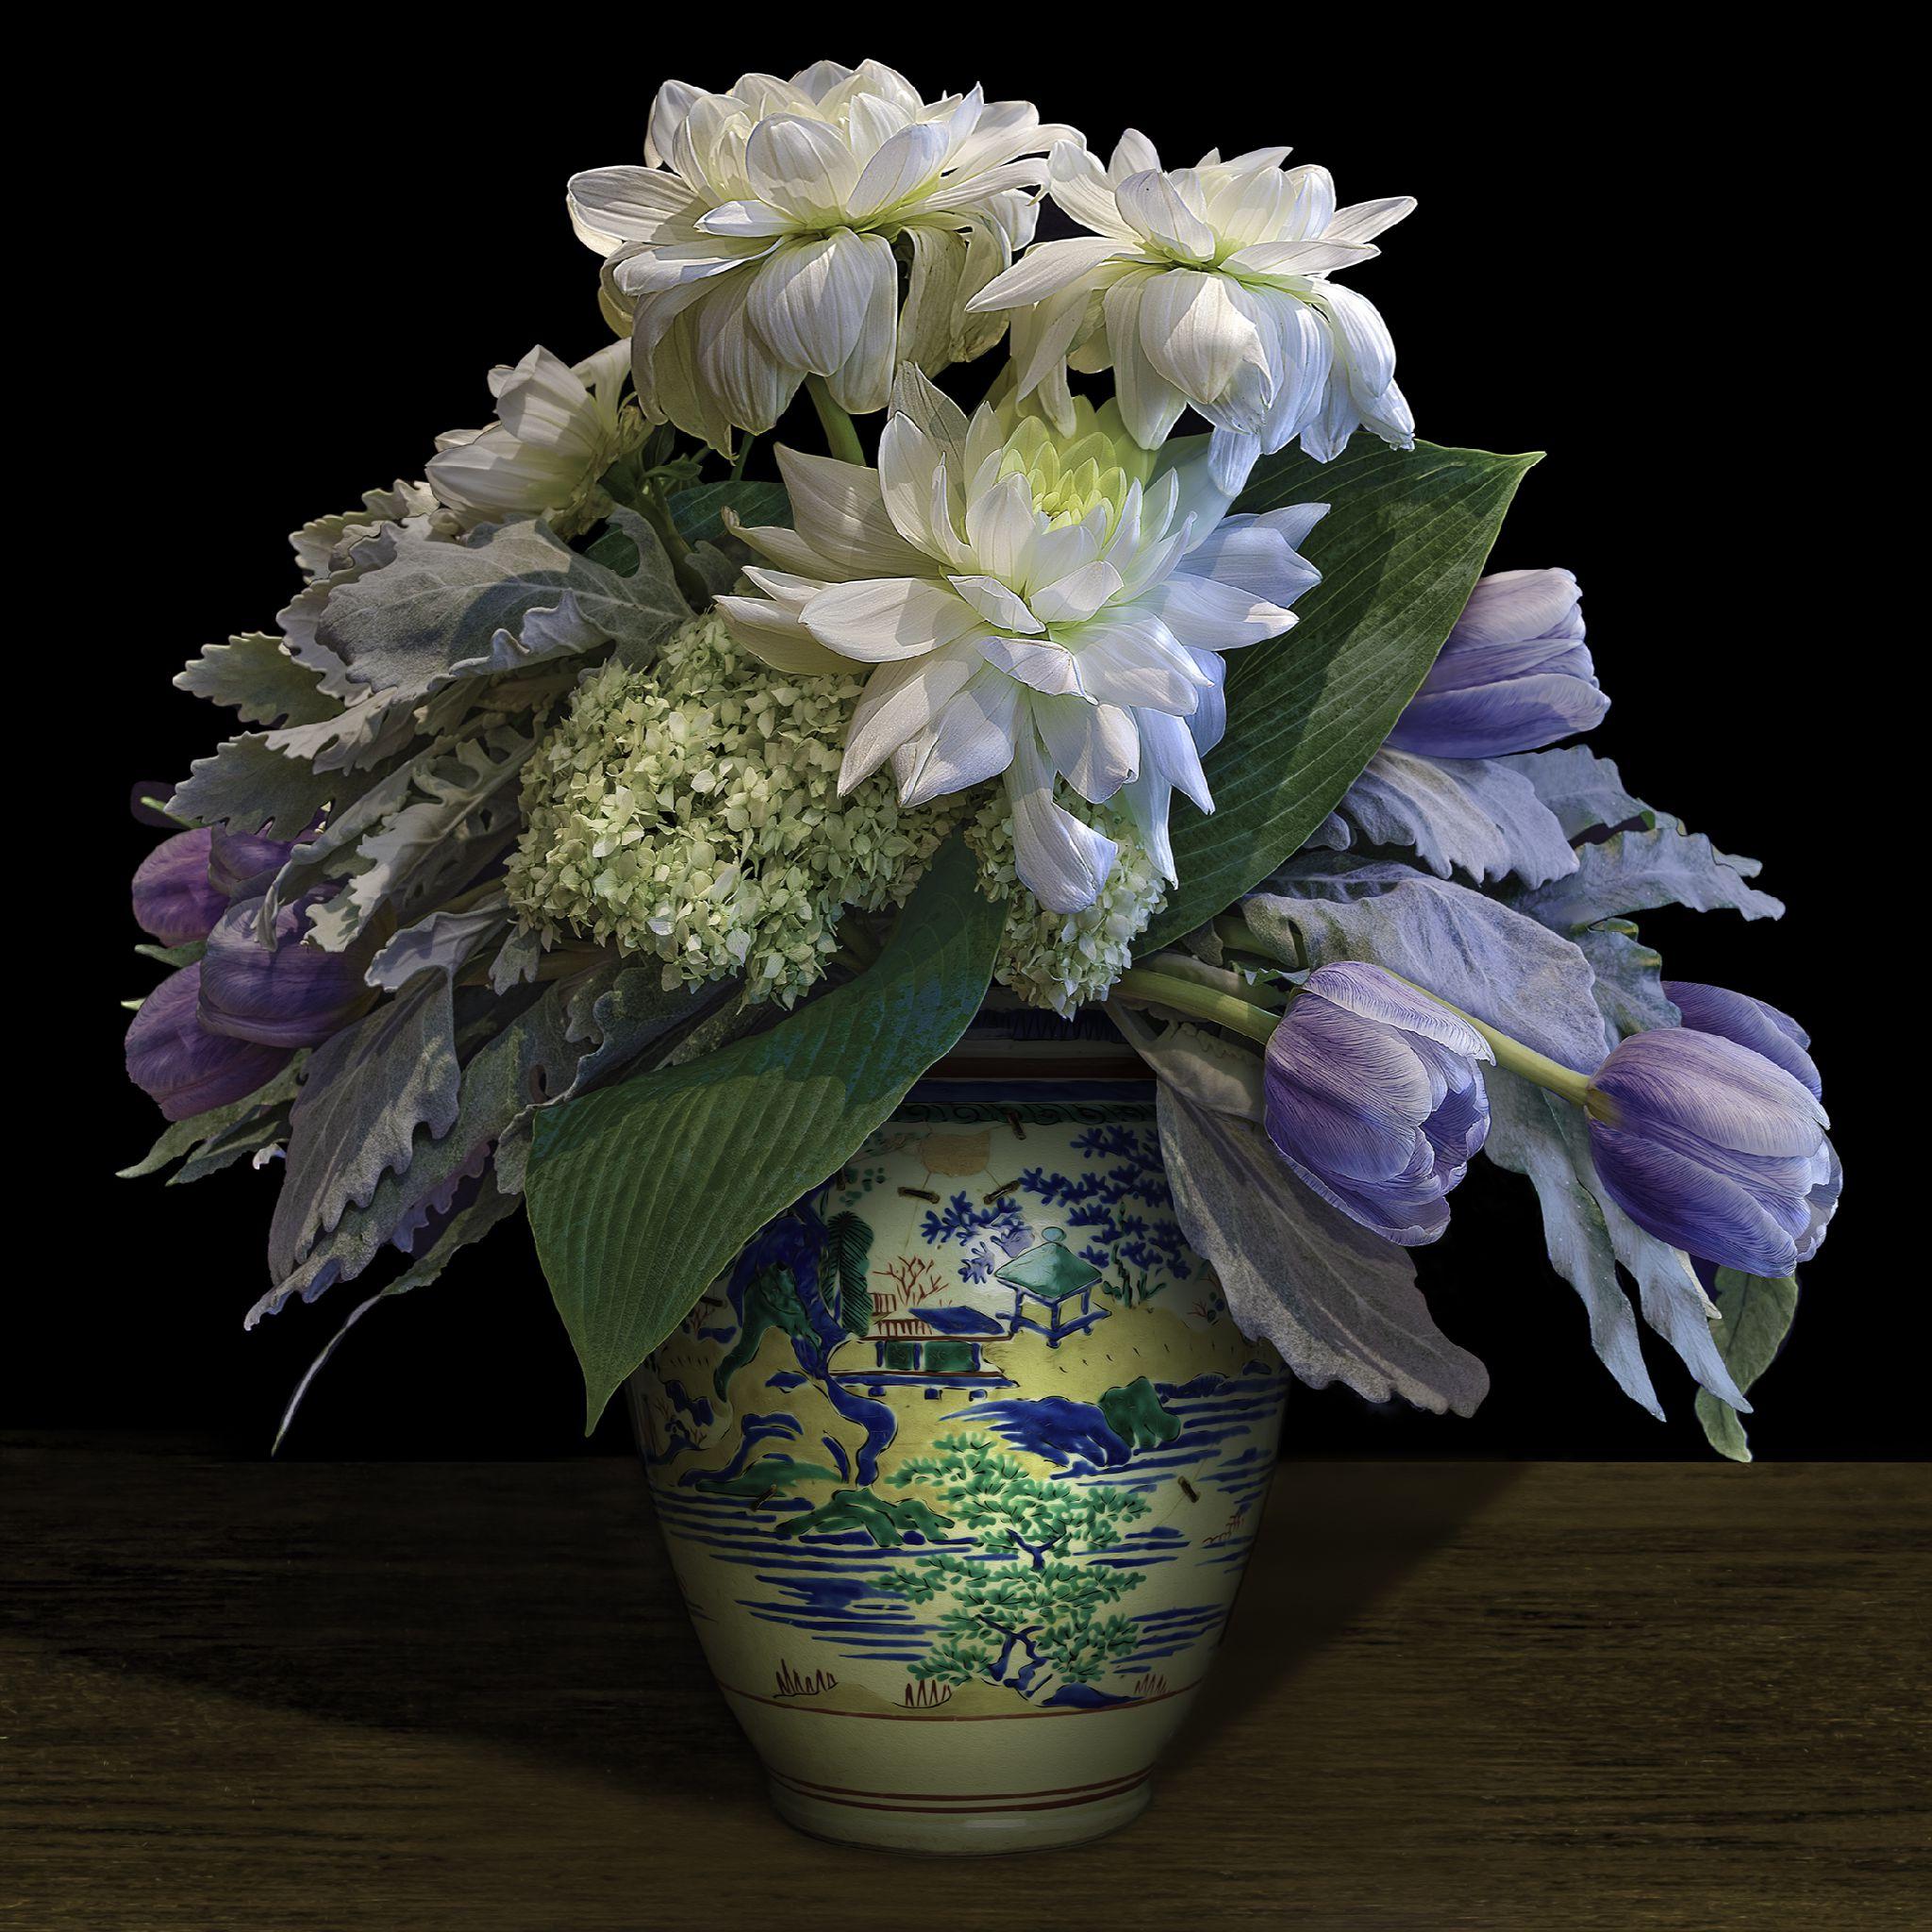 Dahlias, Tulips, and Hydrangeas in a Japanese Vessel - Photograph by T.M. Glass